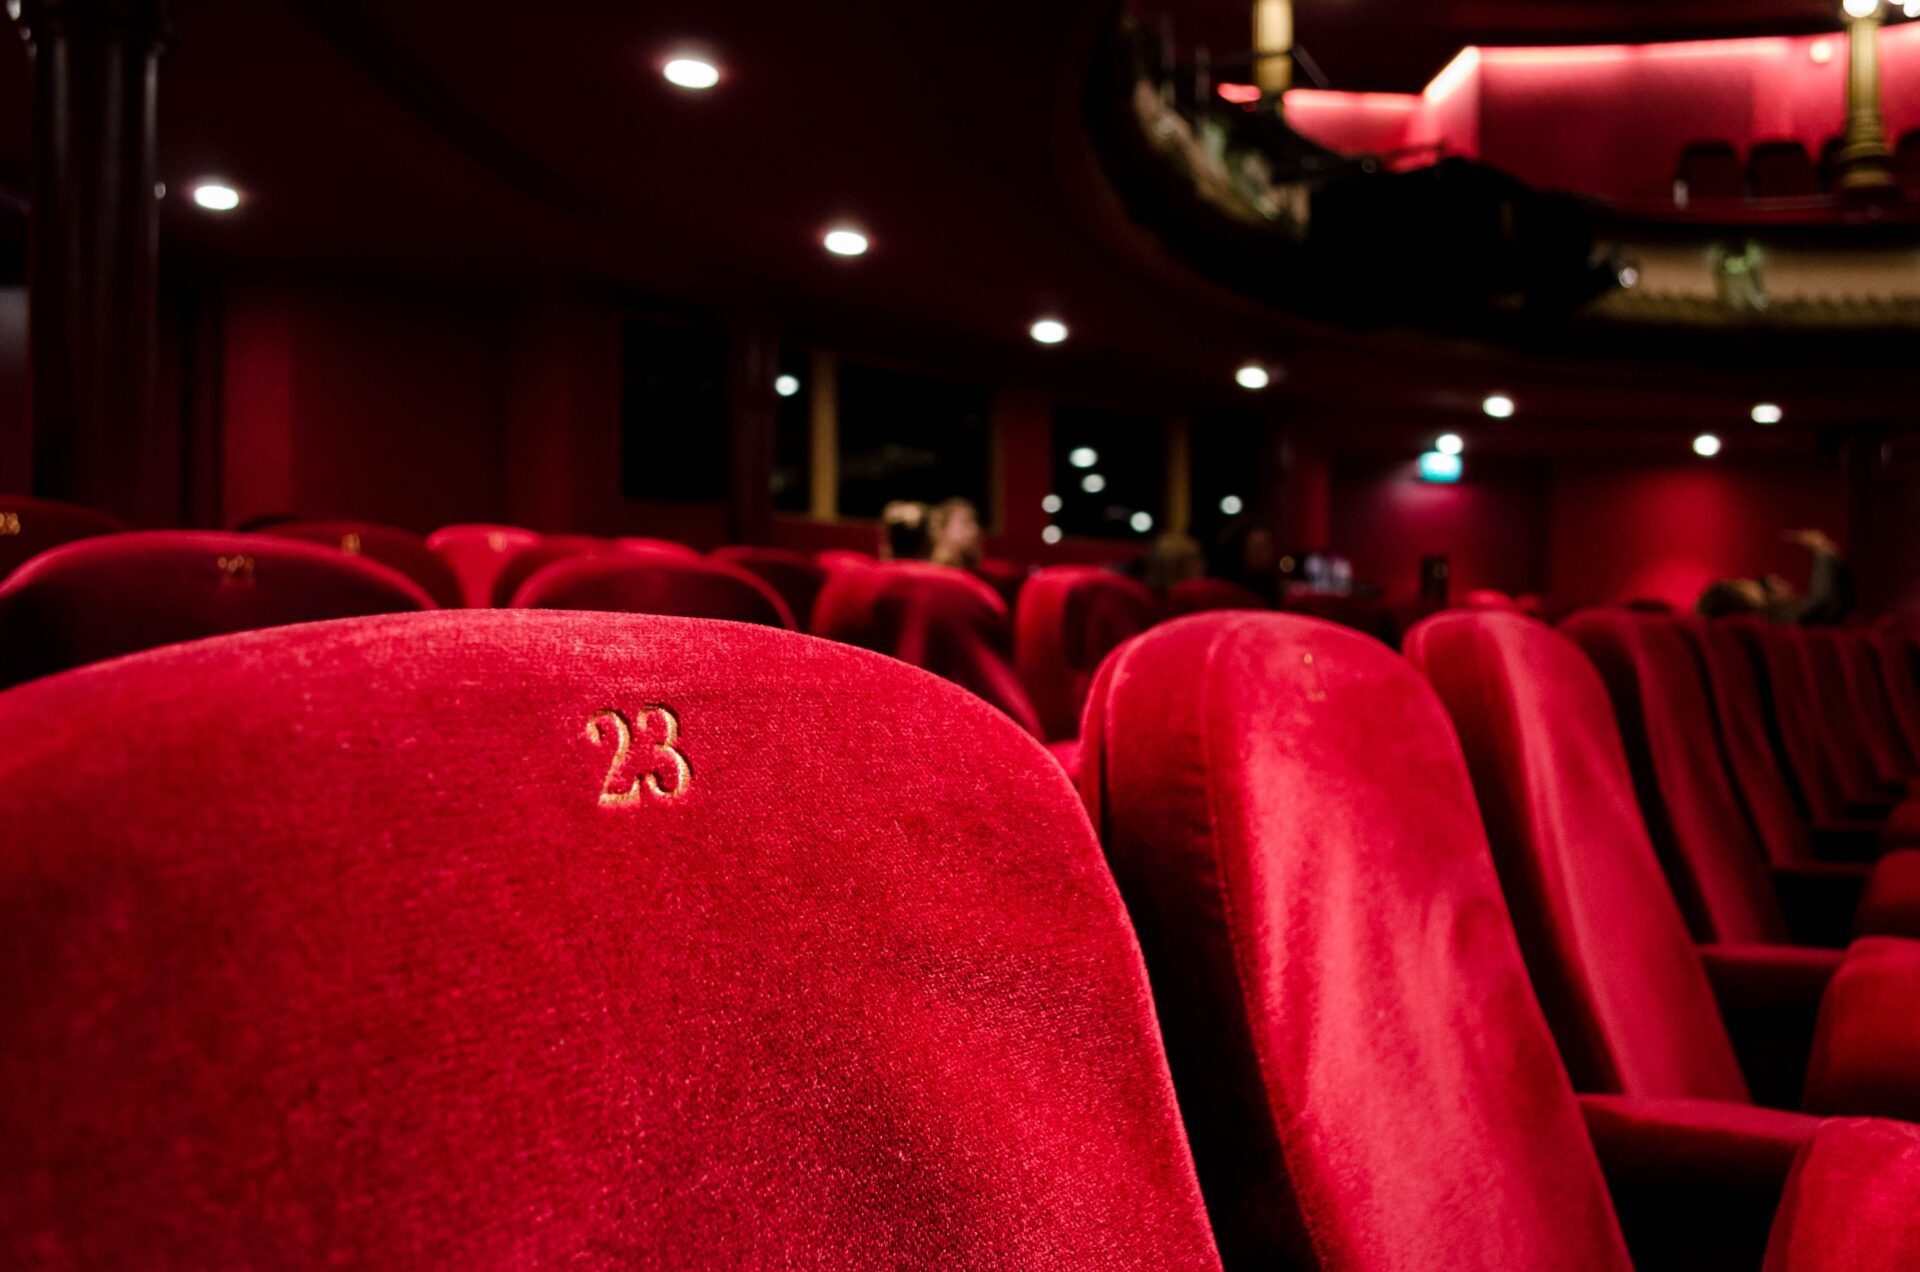 Seats in the theatre